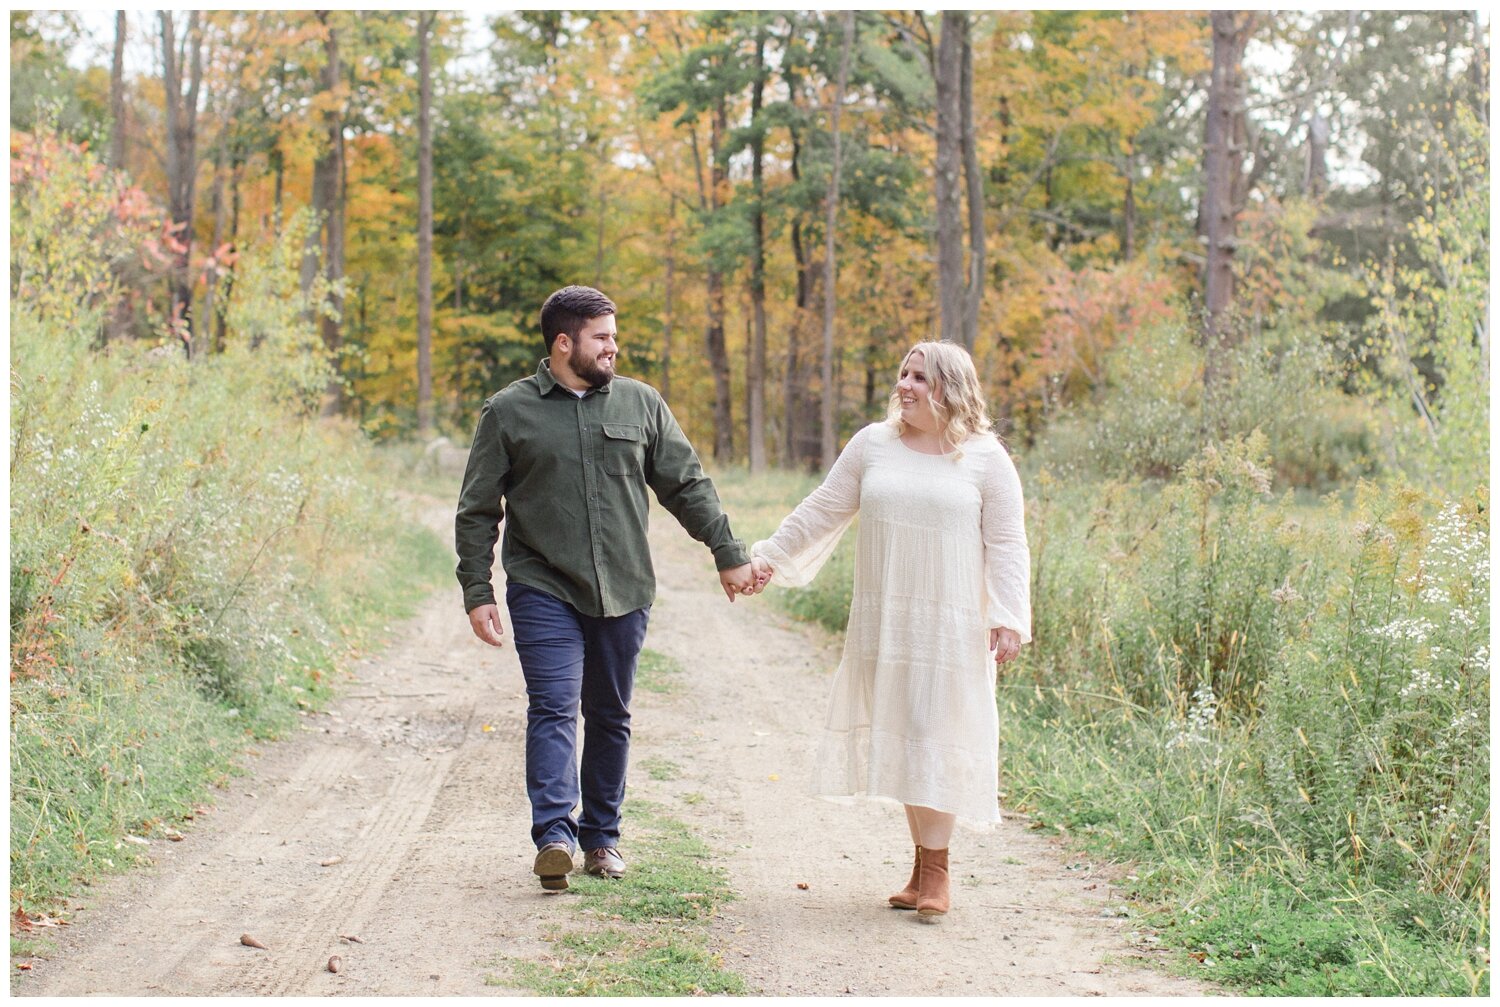 Clarks Summit PA Fall Engagement Session_0020.jpg